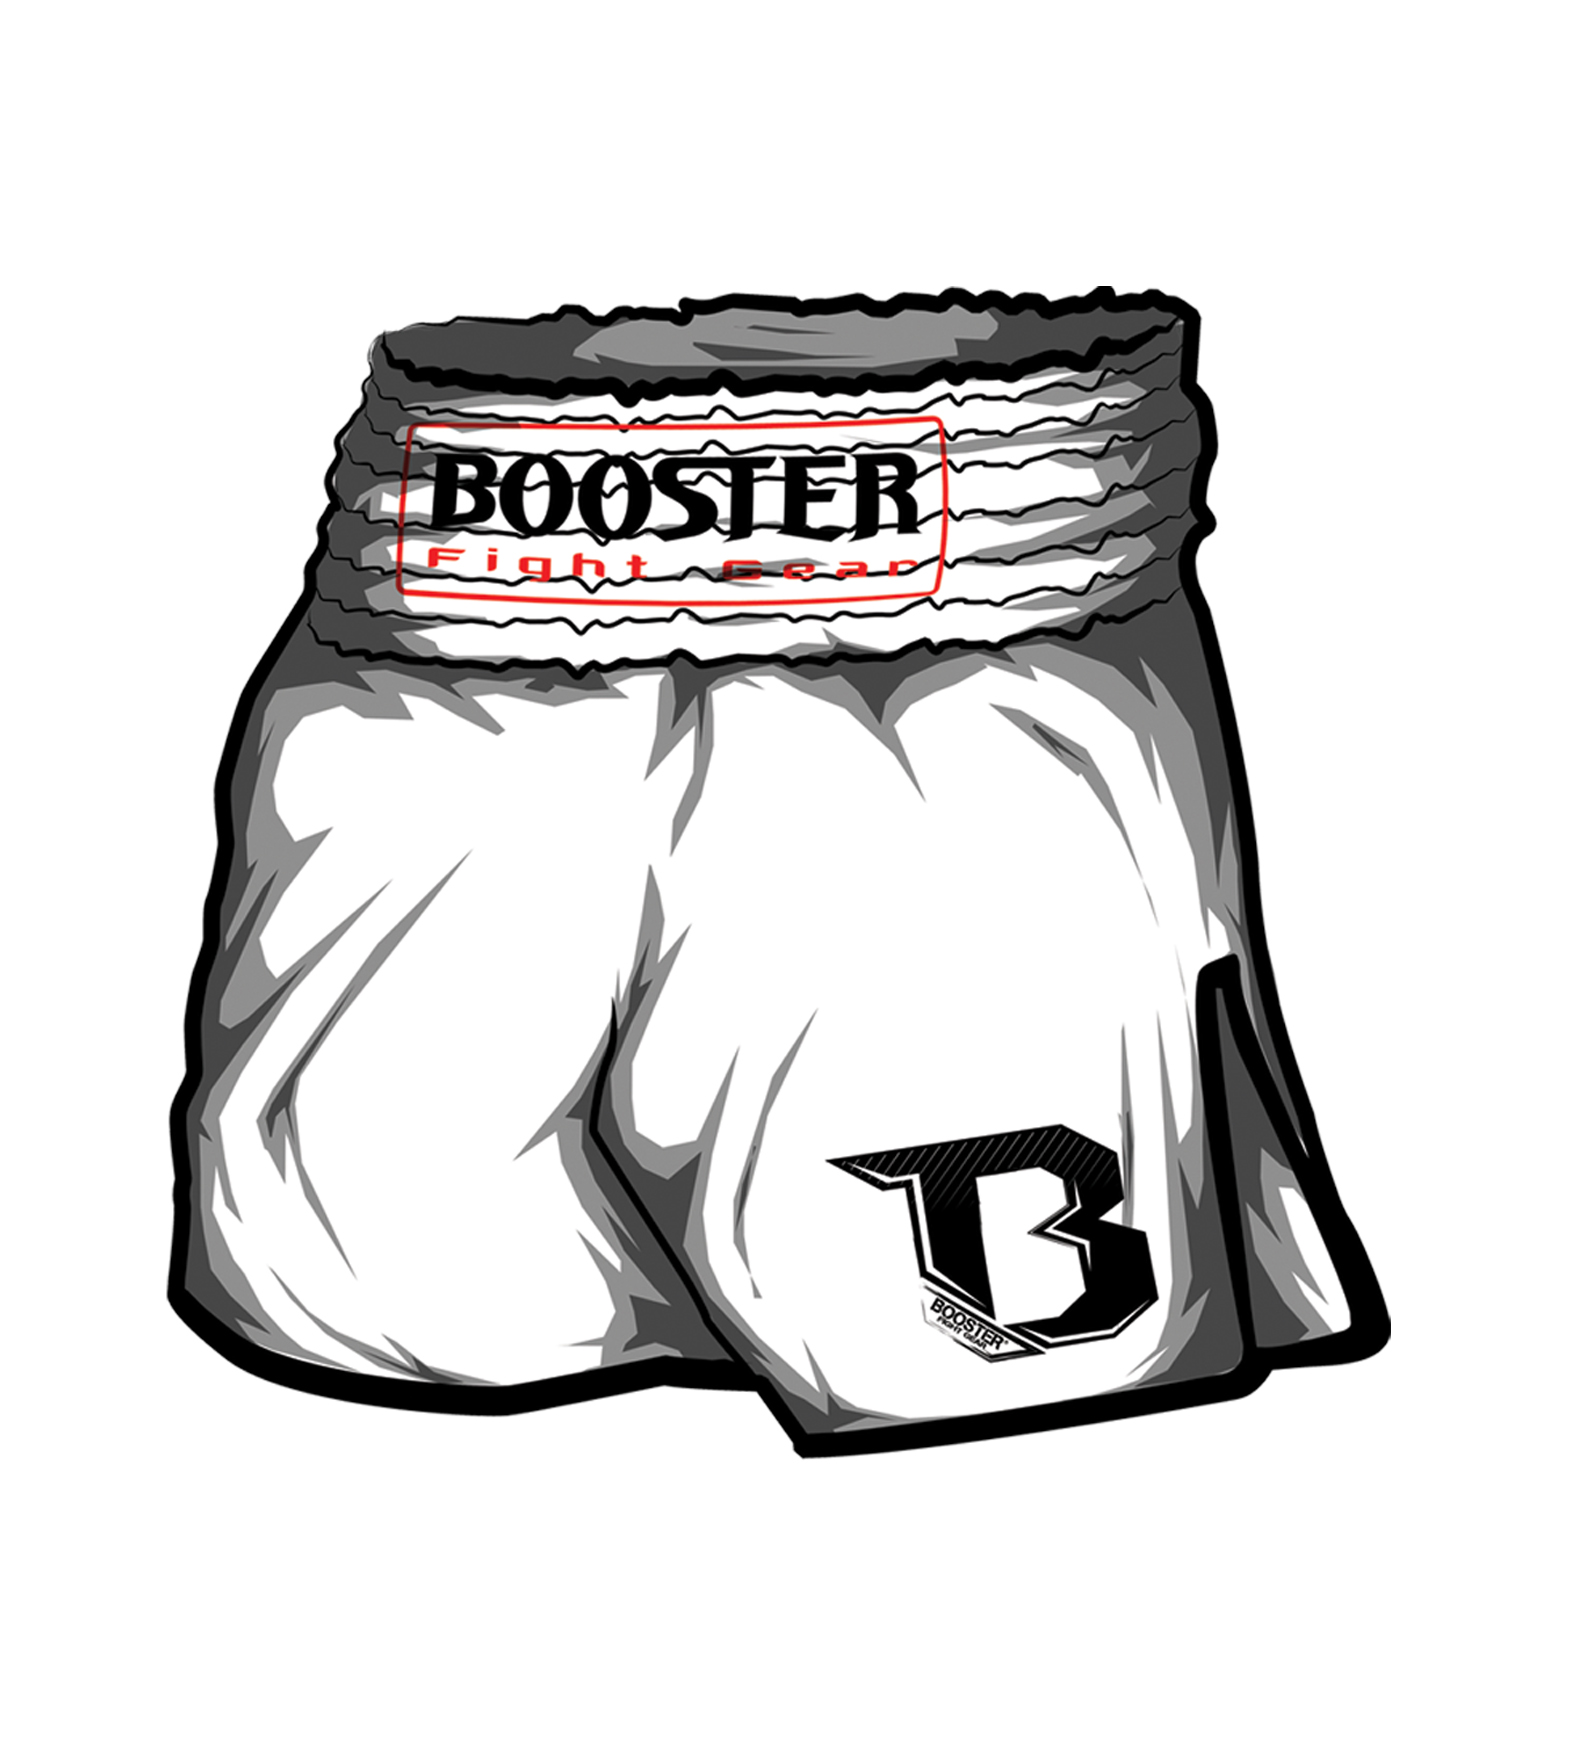 Booster  TBS trunks white - M